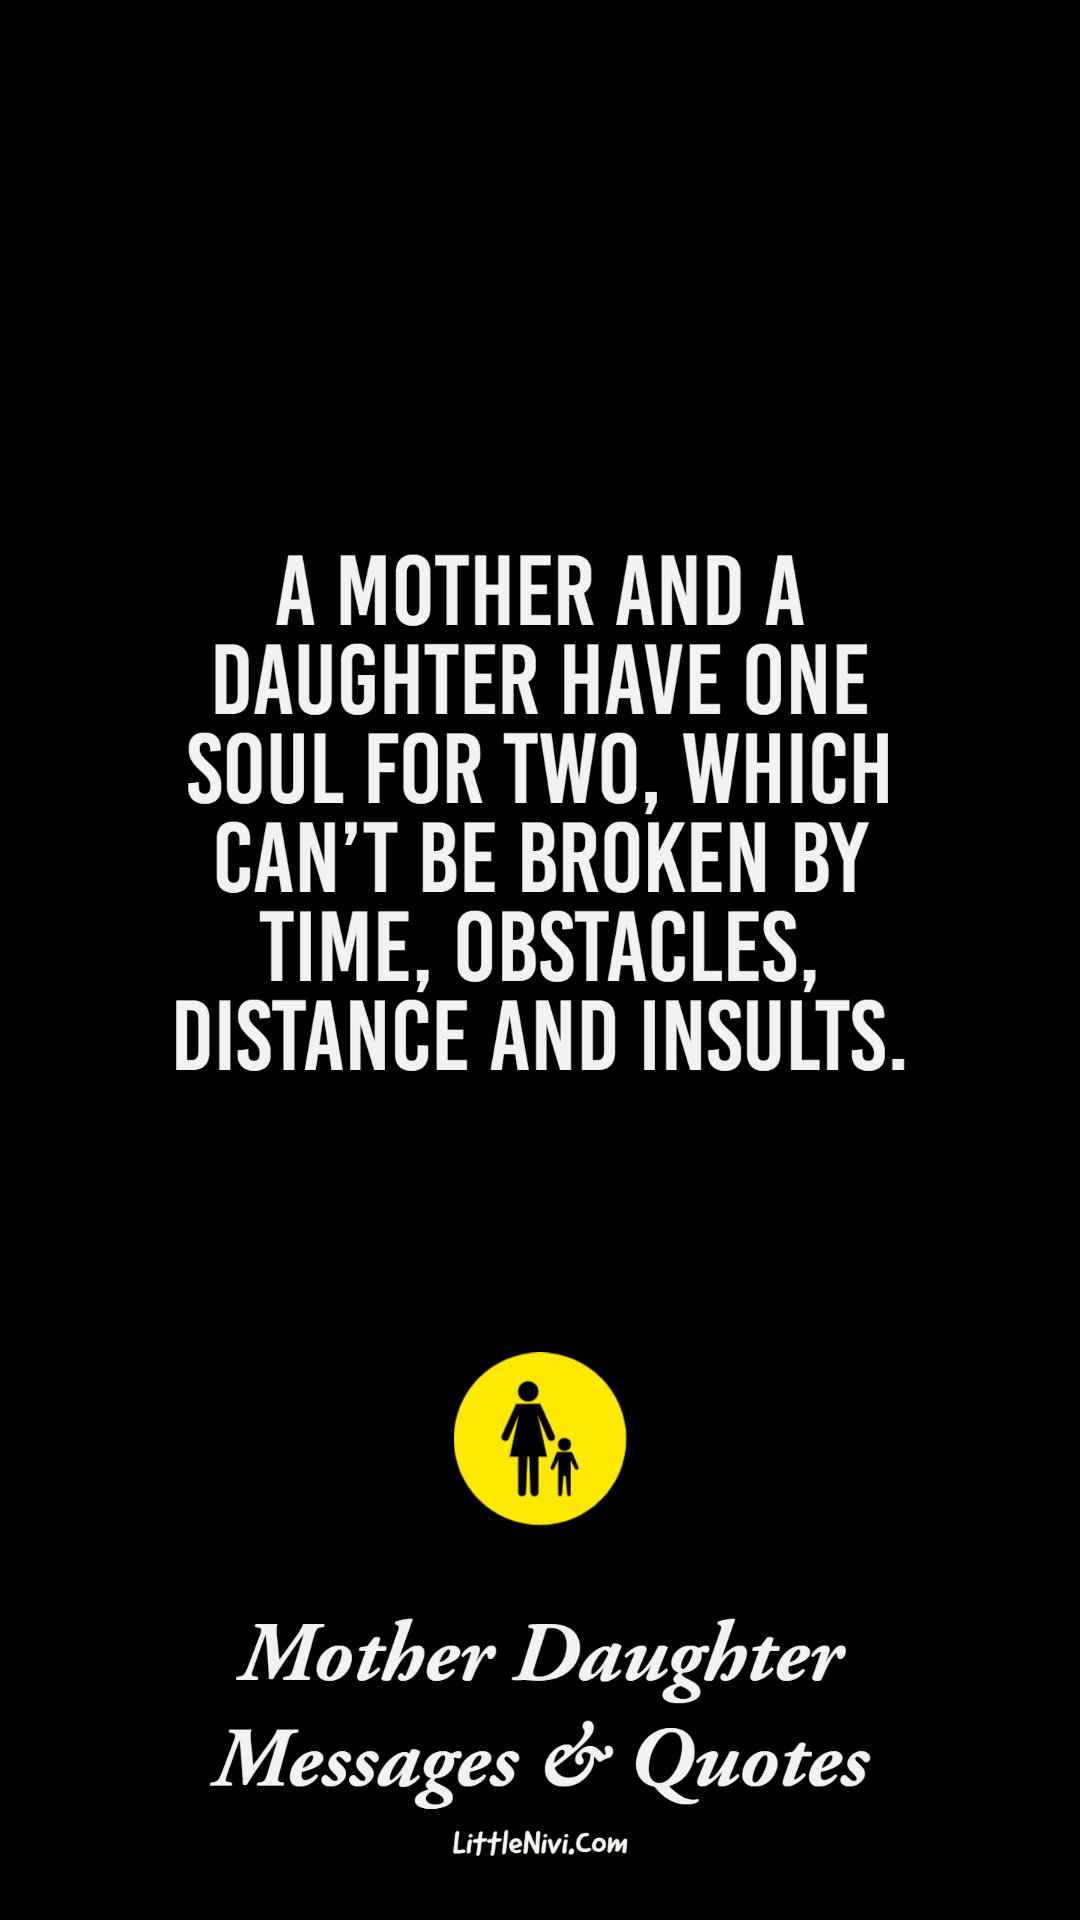 inspiring mom quotes from daughter touching mother daughter quotes